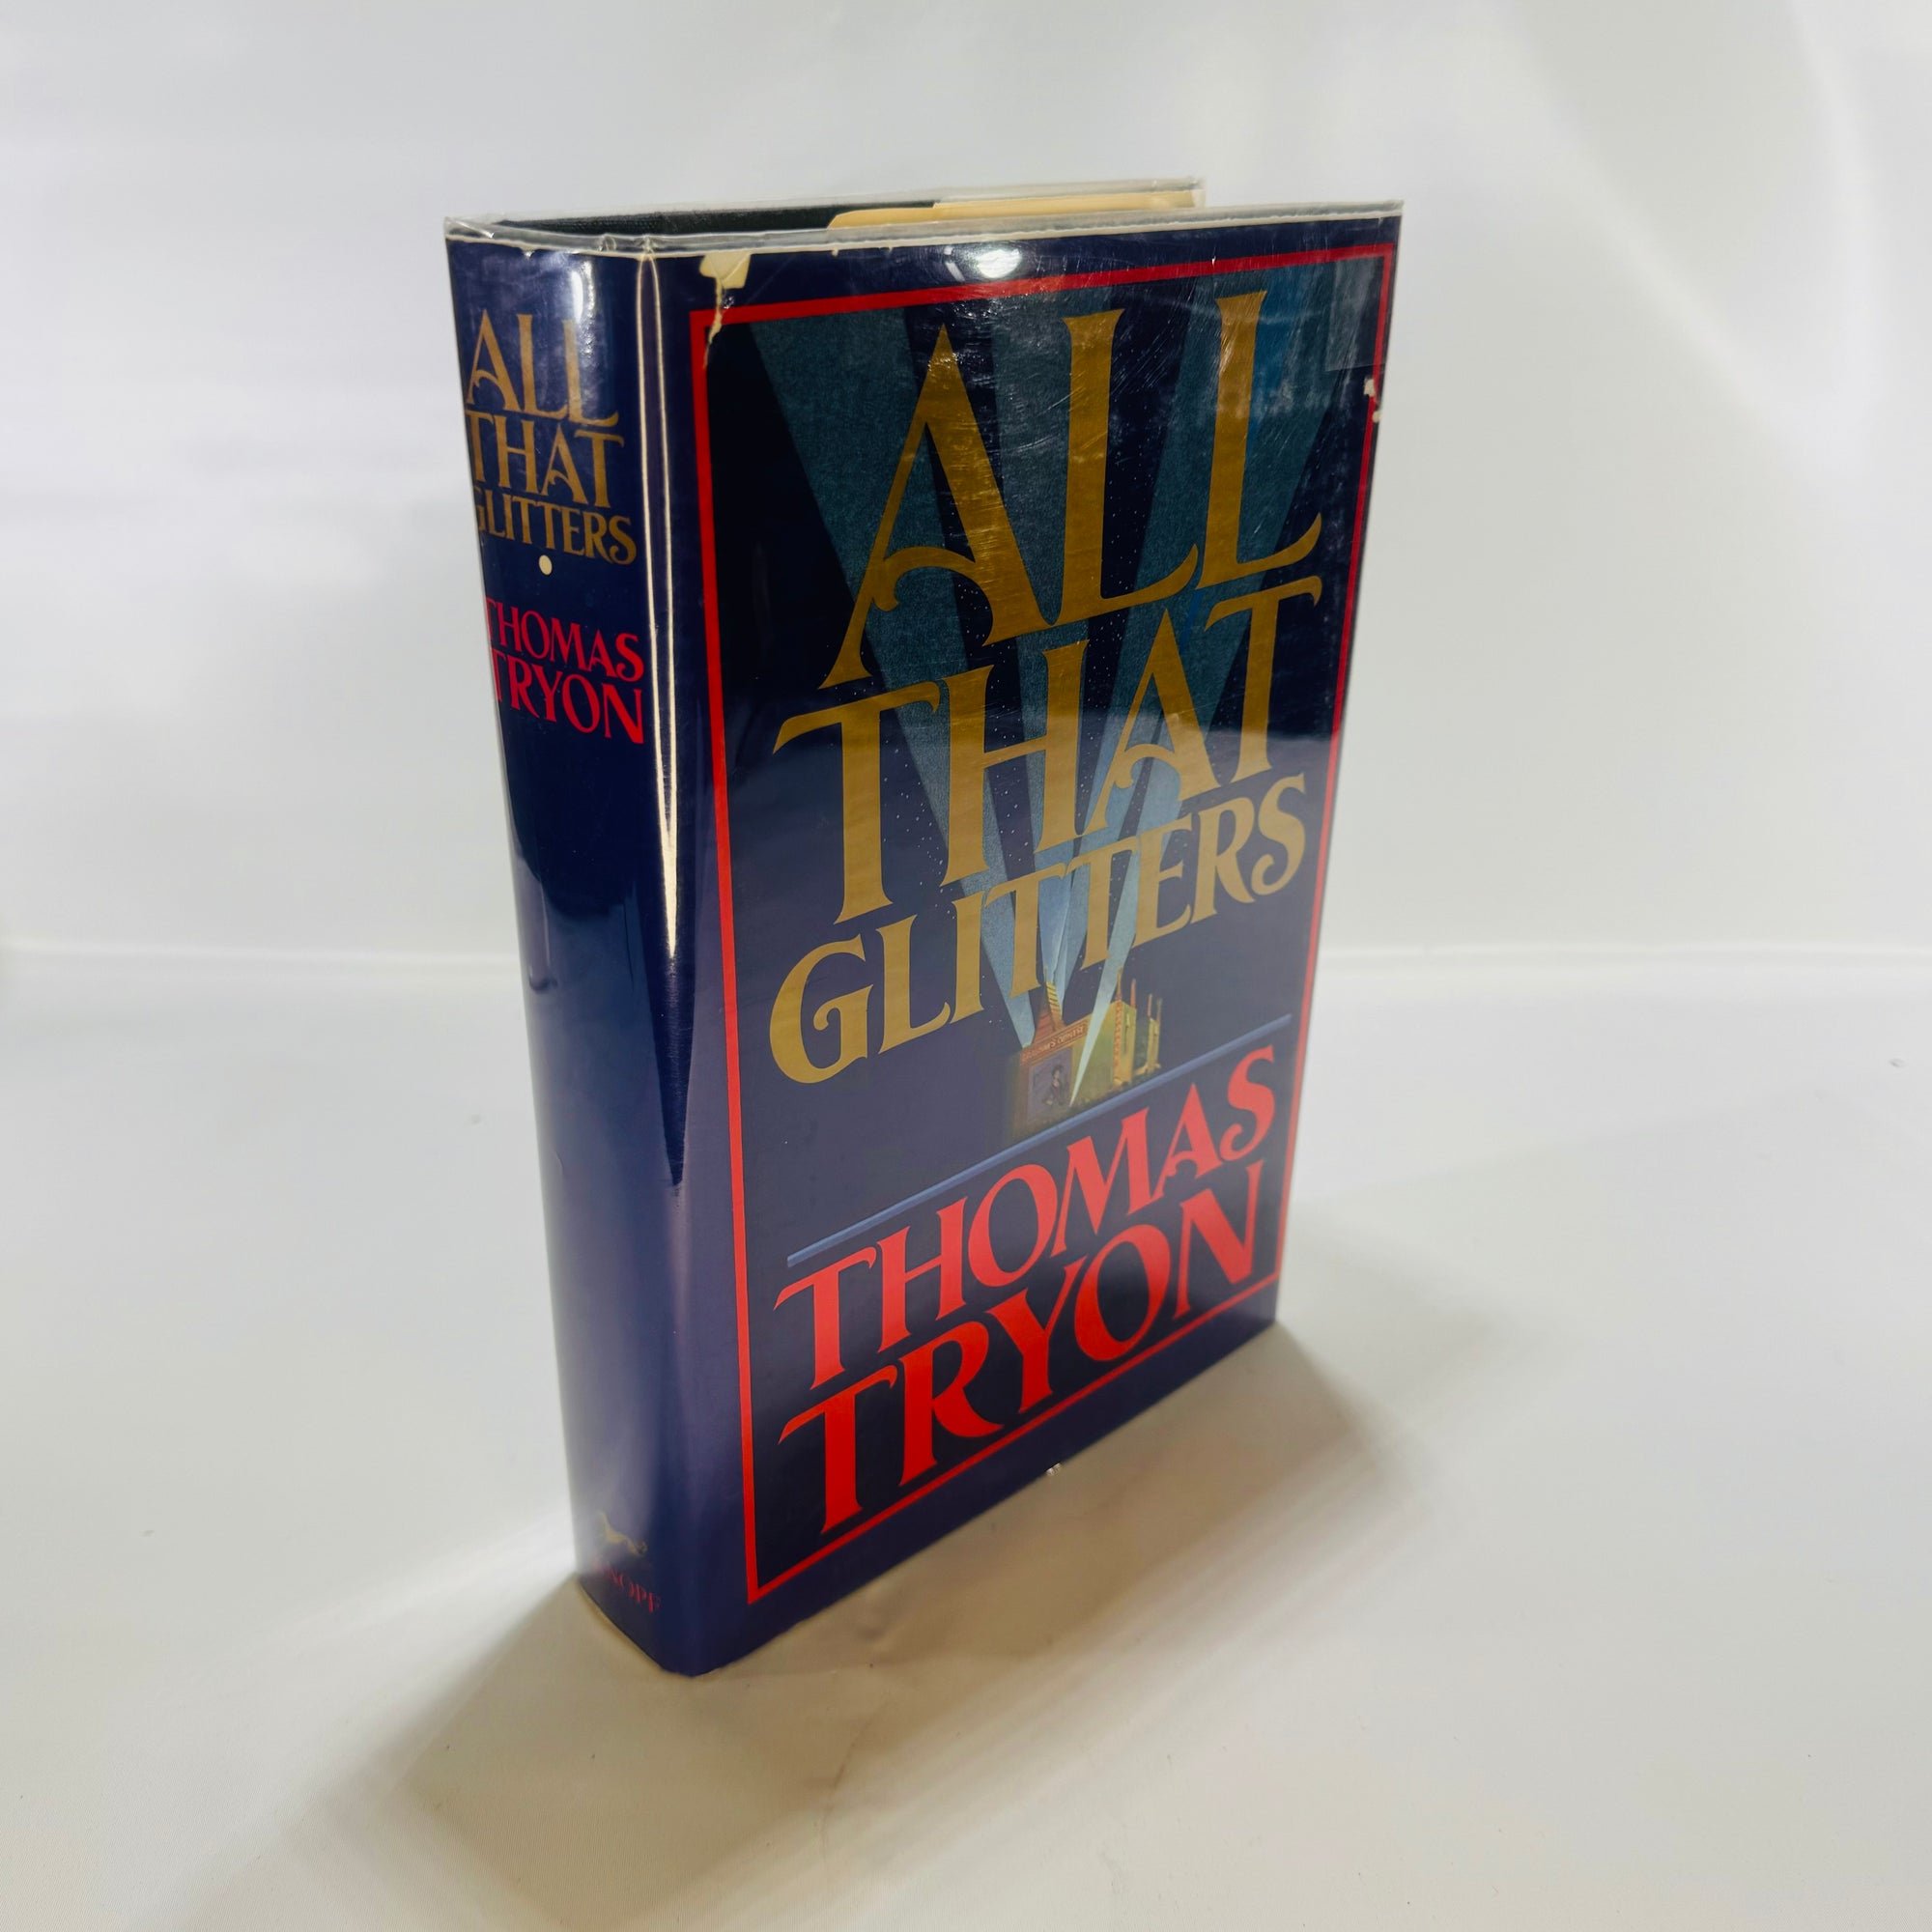 All That Glitters by Thomas Tryon 1986 Alfred A. Knopf